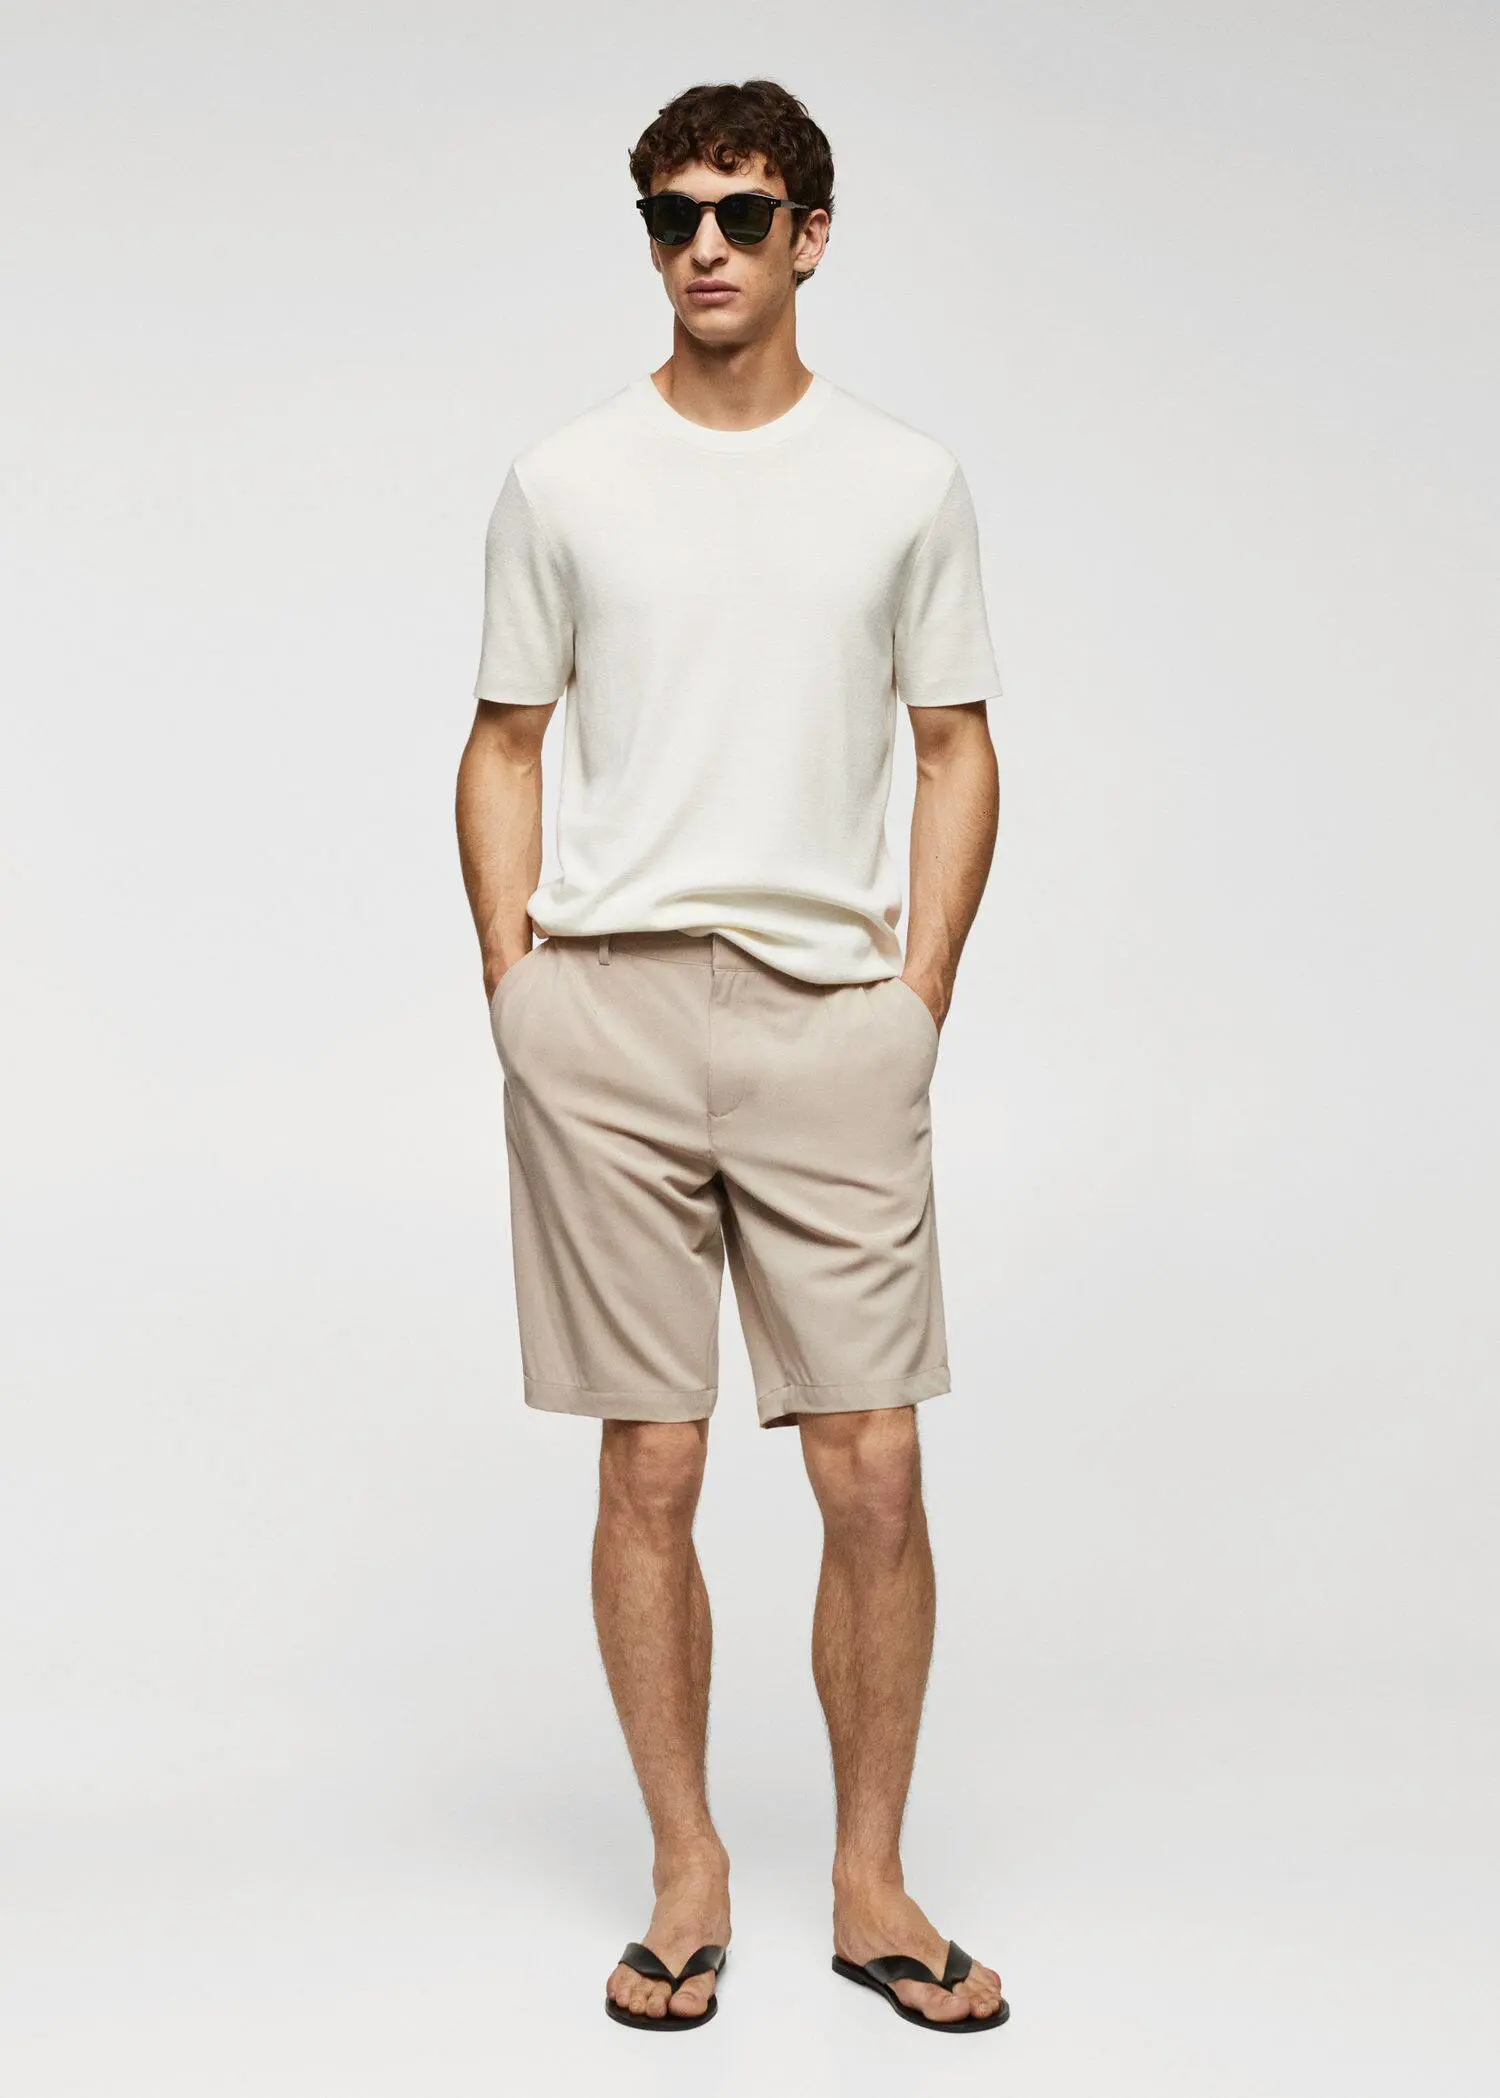 Mango Cotton pleated Bermuda shorts. a young man in a white shirt and beige shorts. 